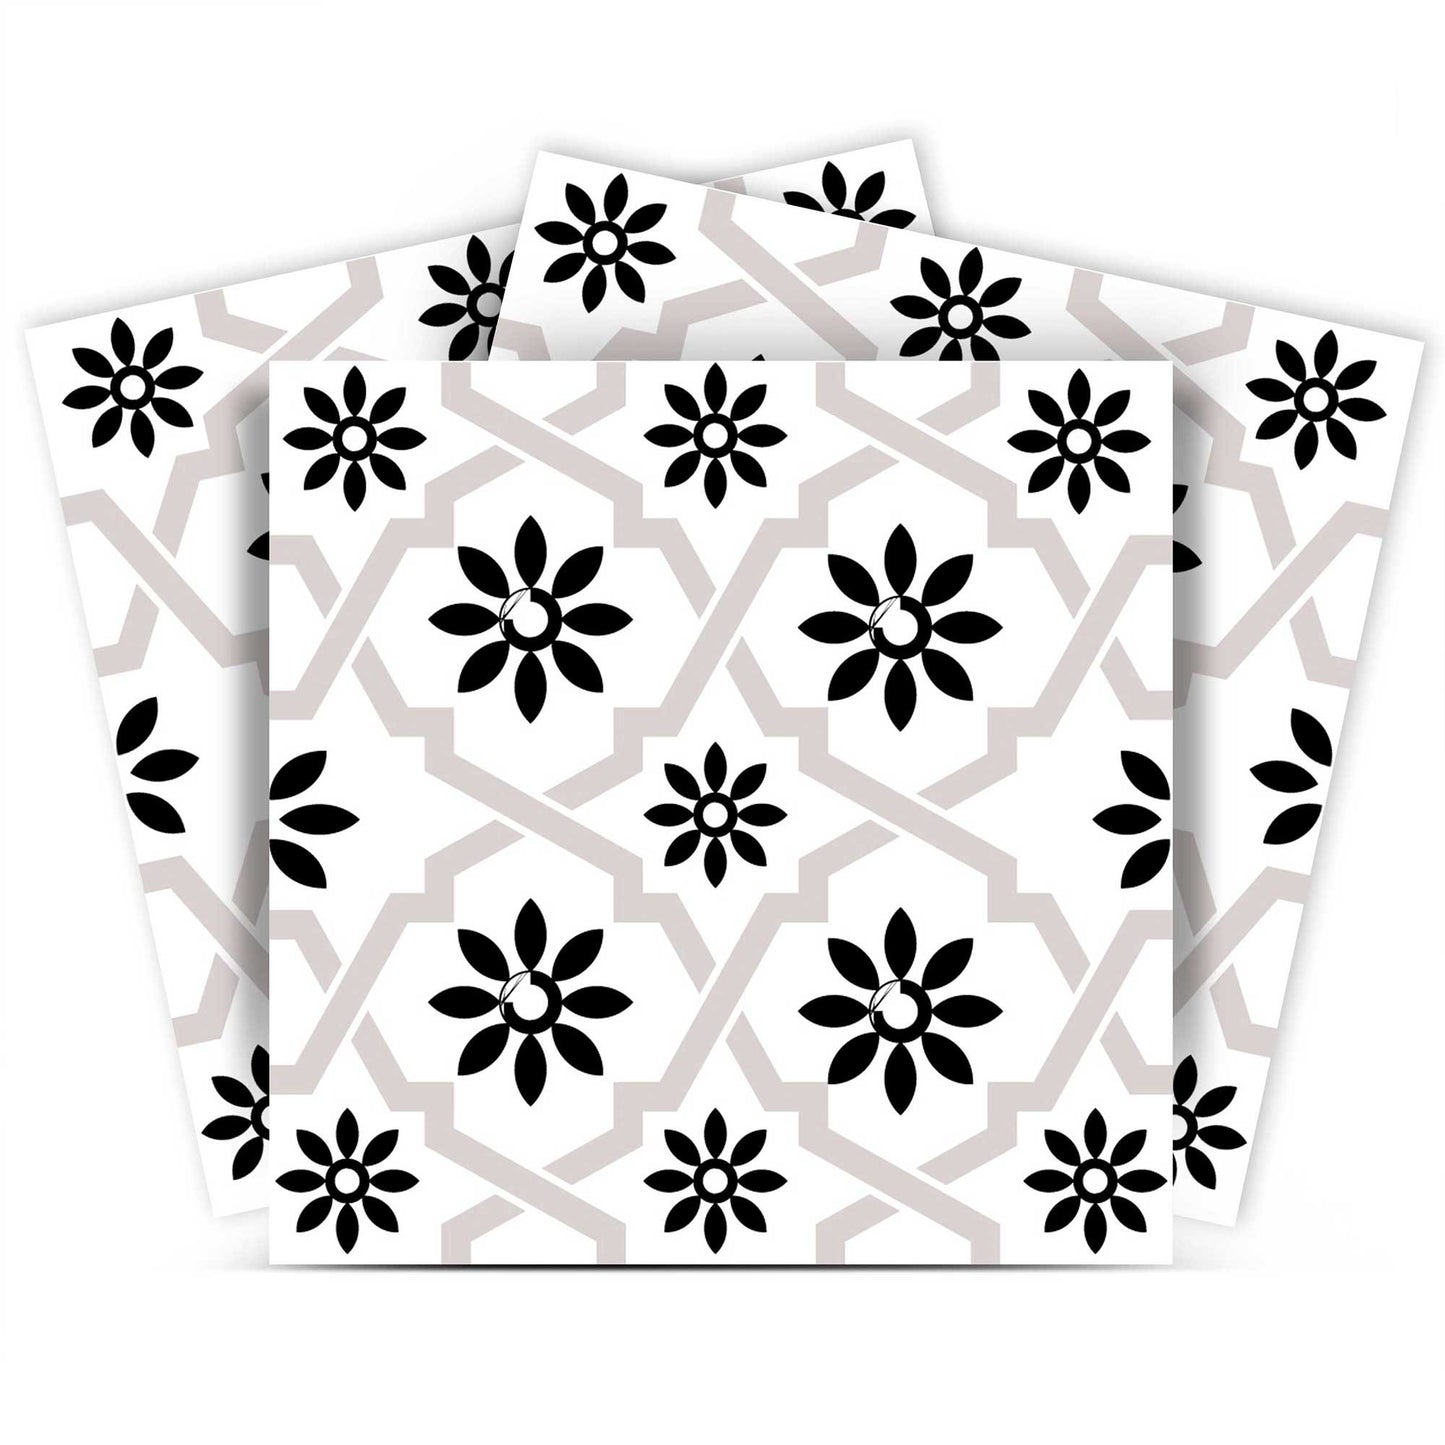 4" X 4" Black and White Lil Daisy Peel and Stick Removable Tiles